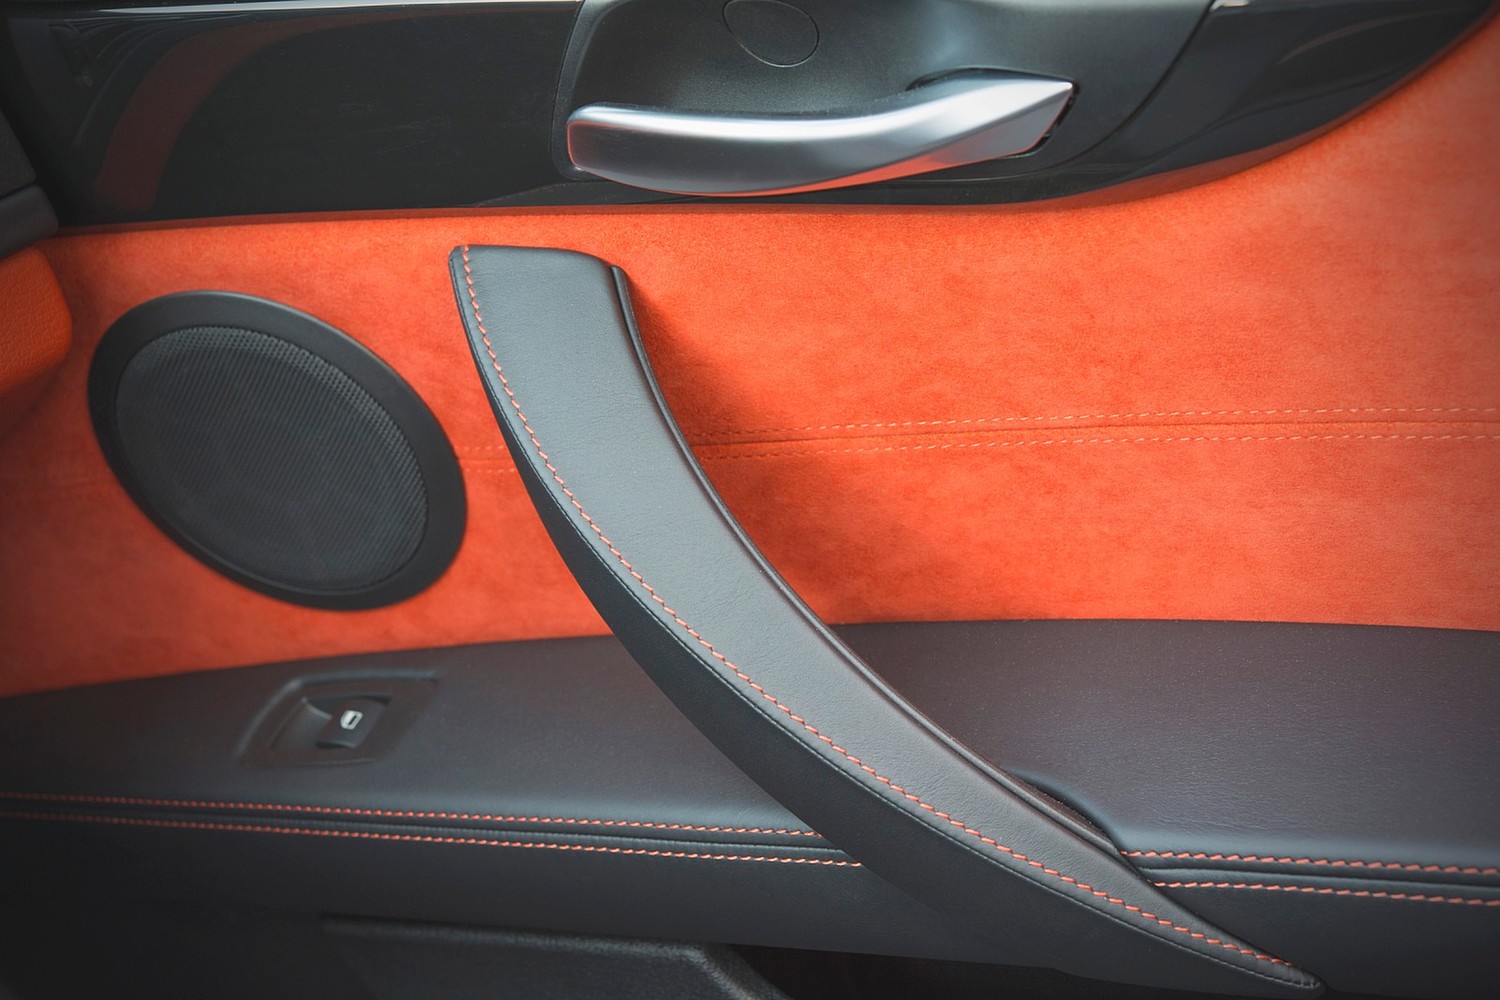 BMW Z4 sDrive35is Convertible Interior Detail (2015 model year shown)